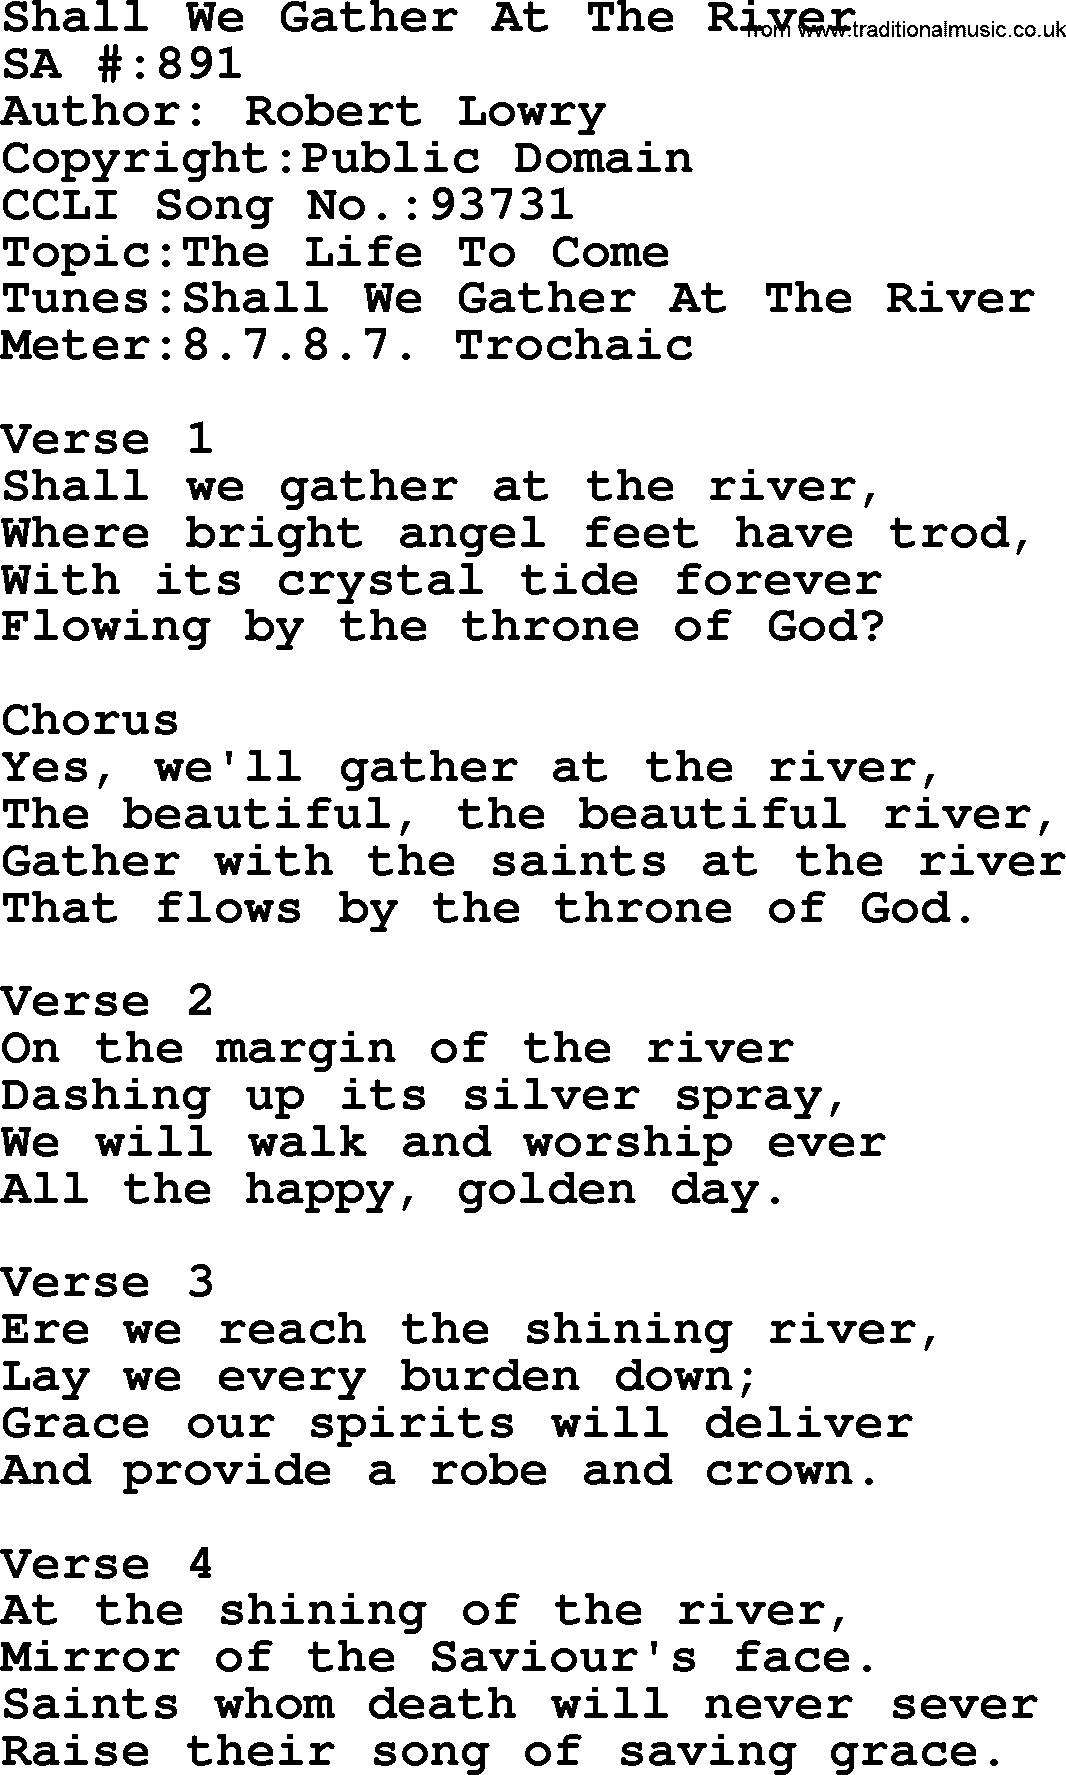 Salvation Army Hymnal, title: Shall We Gather At The River, with lyrics and PDF,